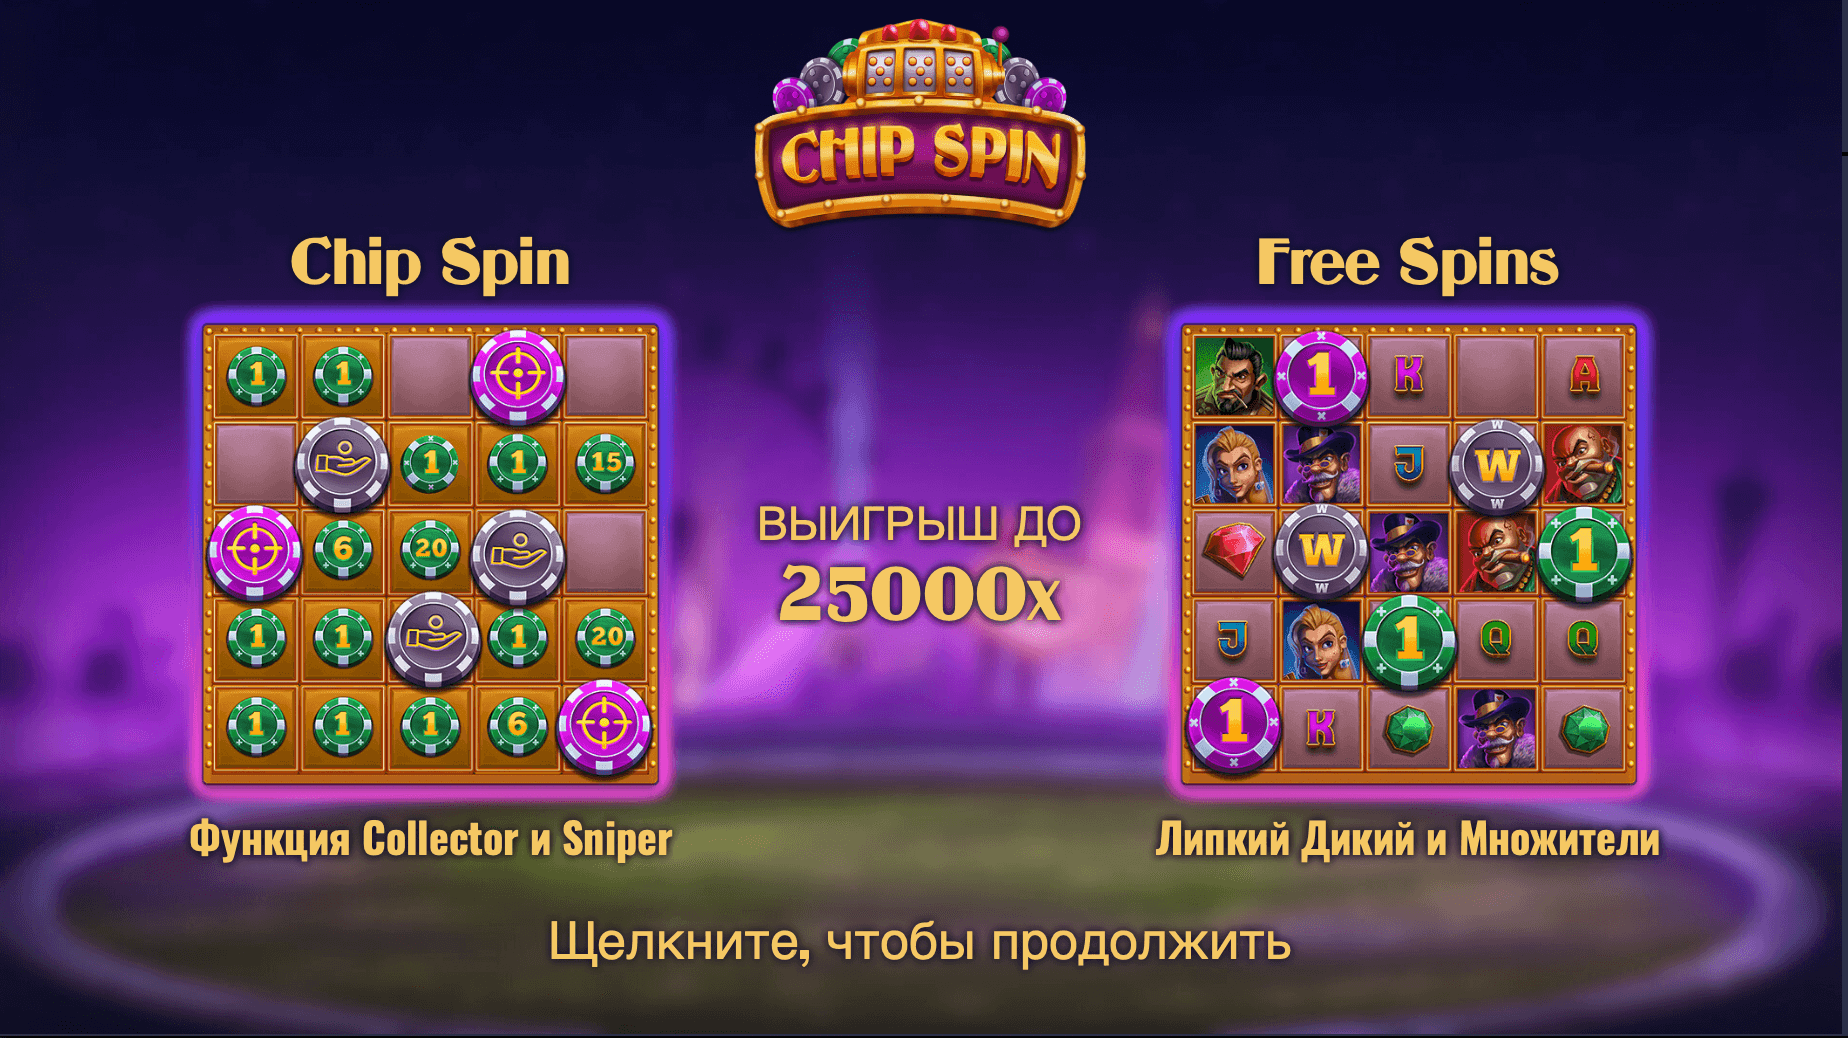 Chip Spin Game process